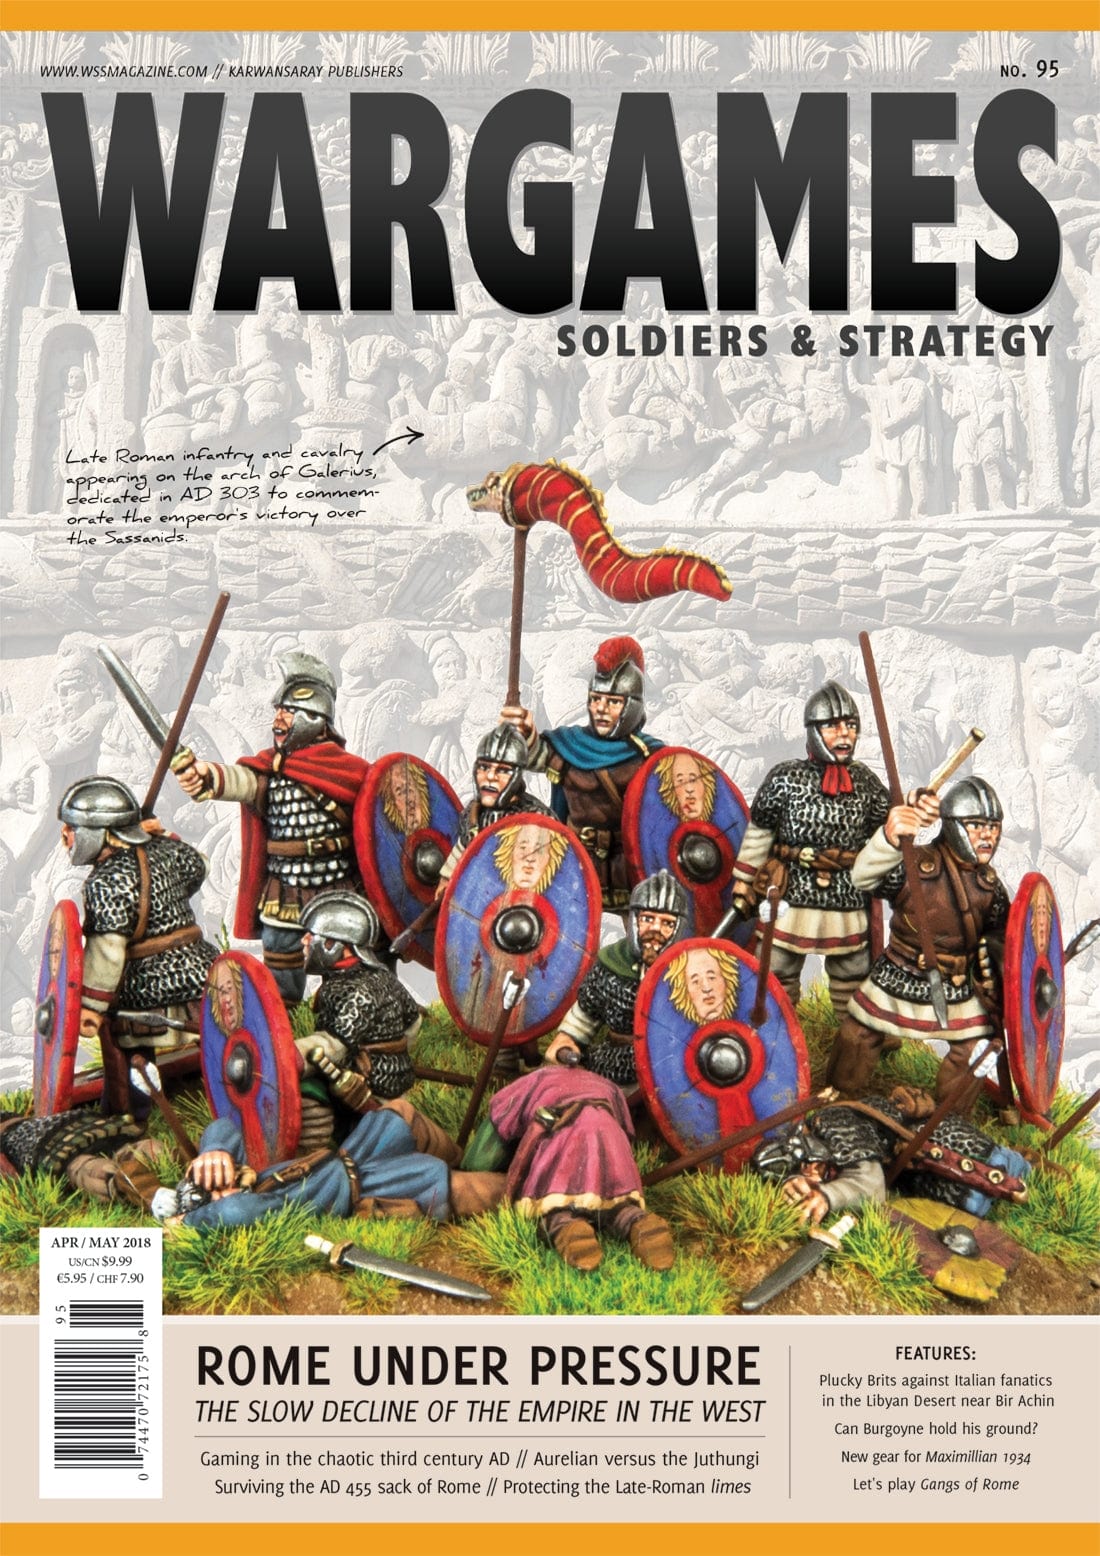 Karwansaray BV Print, Paper Wargames, Soldiers and Strategy 95